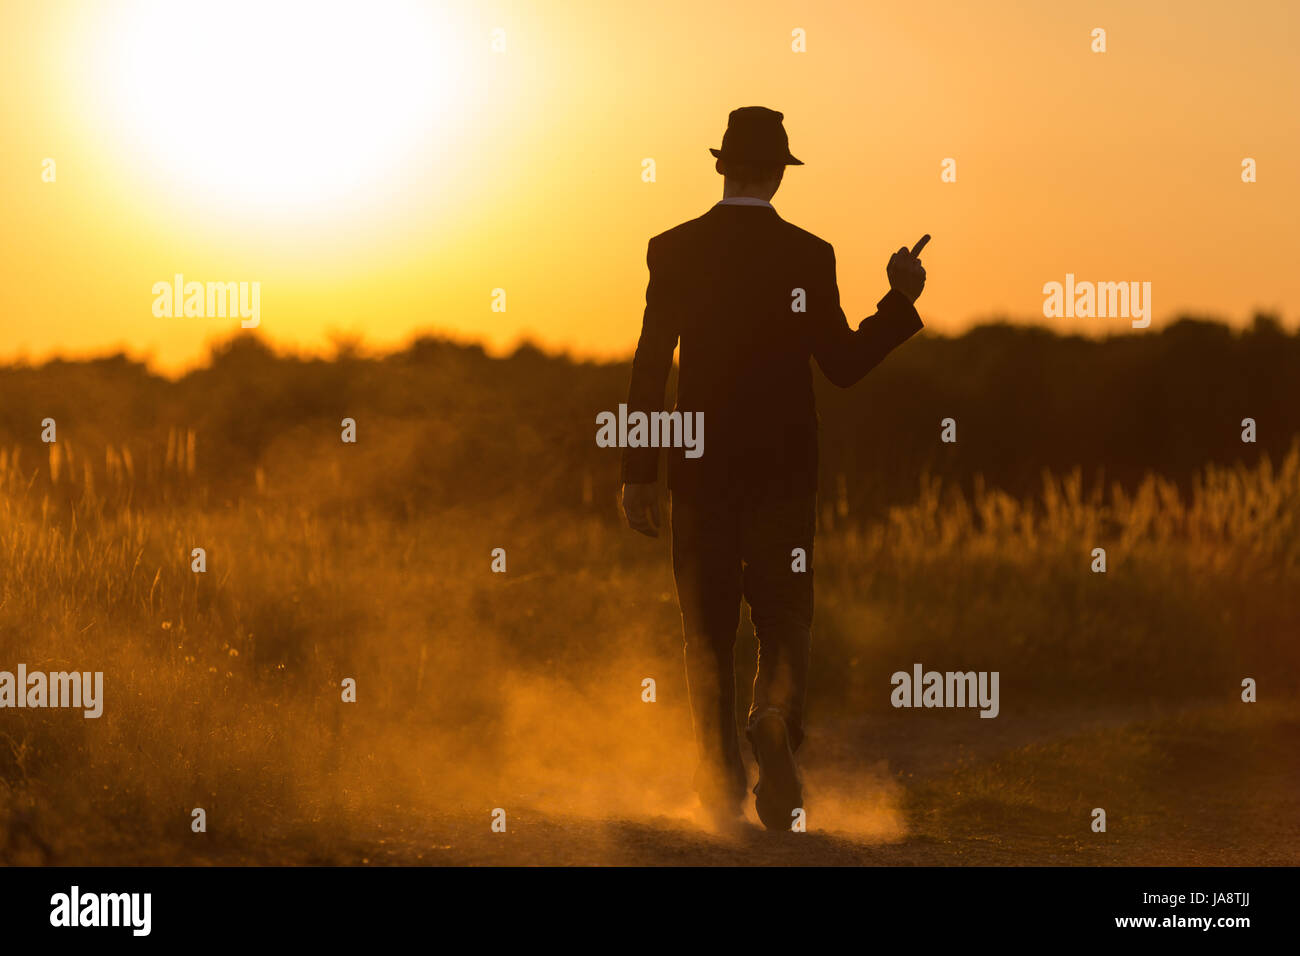 walk, go, going, walking, sunset, go for a walk, alone, lonely, man, abandon, Stock Photo